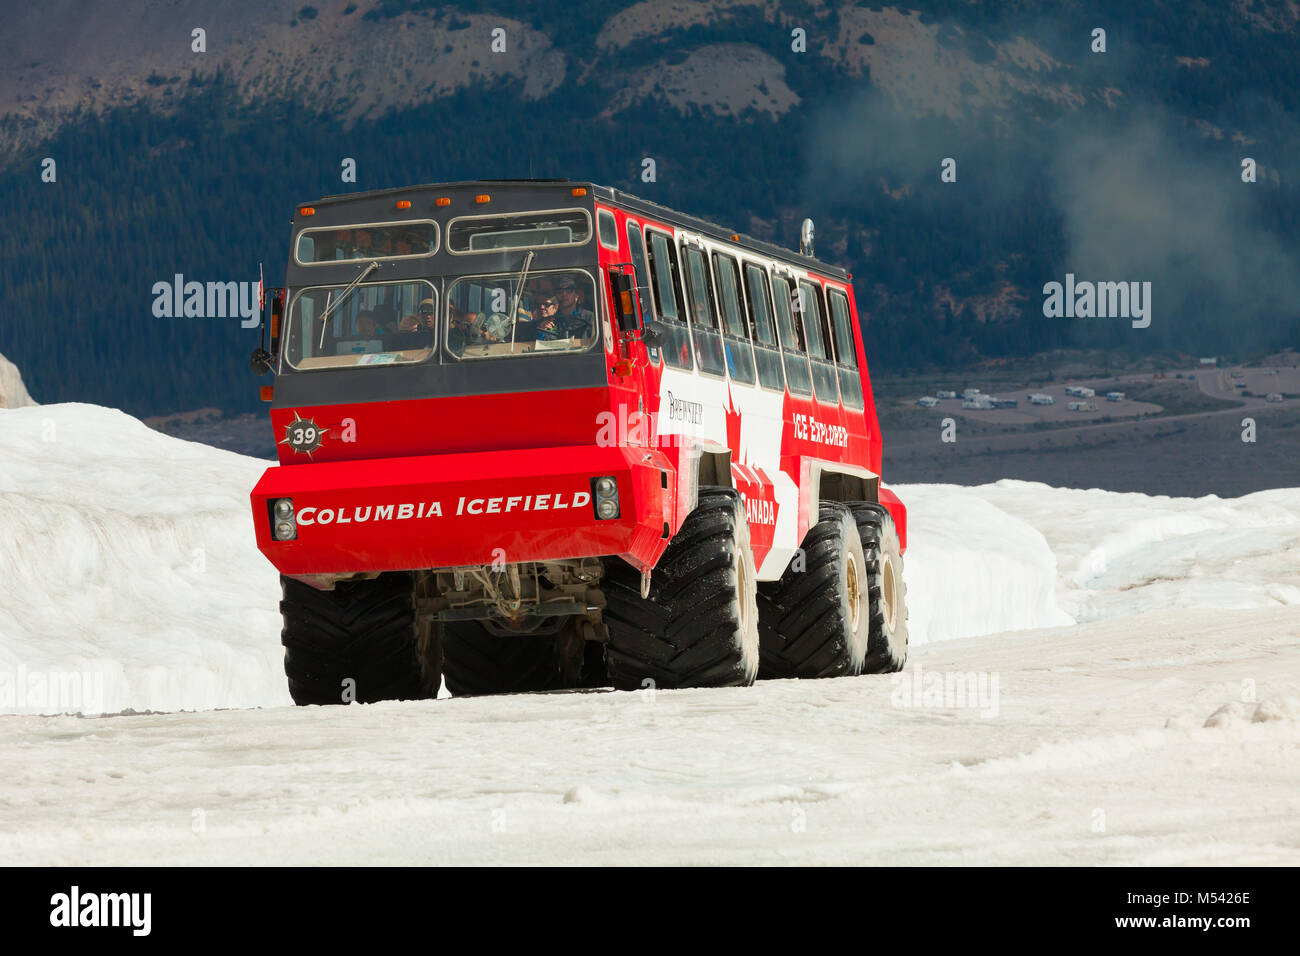 columbia icefield special truck Stock Photo